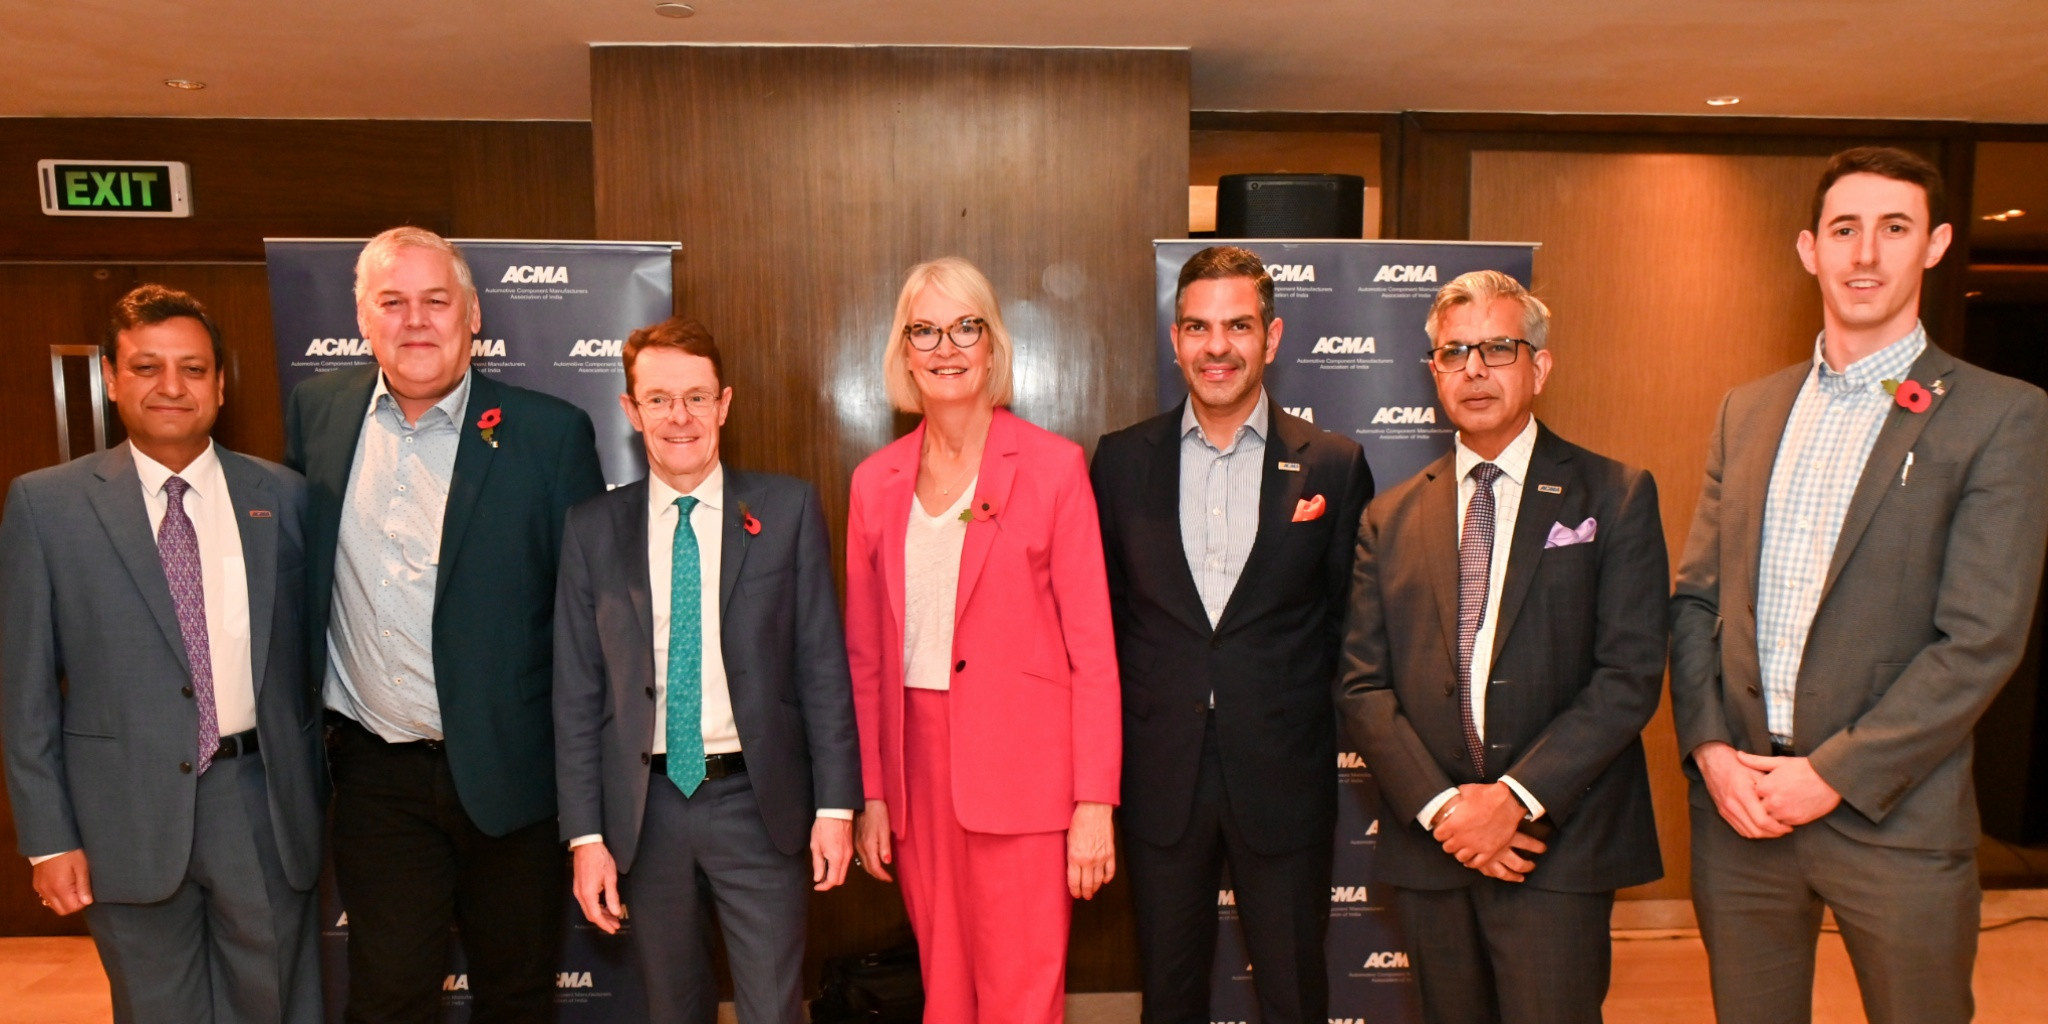 Andy Street, third from left, travelled to India as part of the Commonwealth Games Business and Tourism Programme ©Twitter/Invest West Midlands